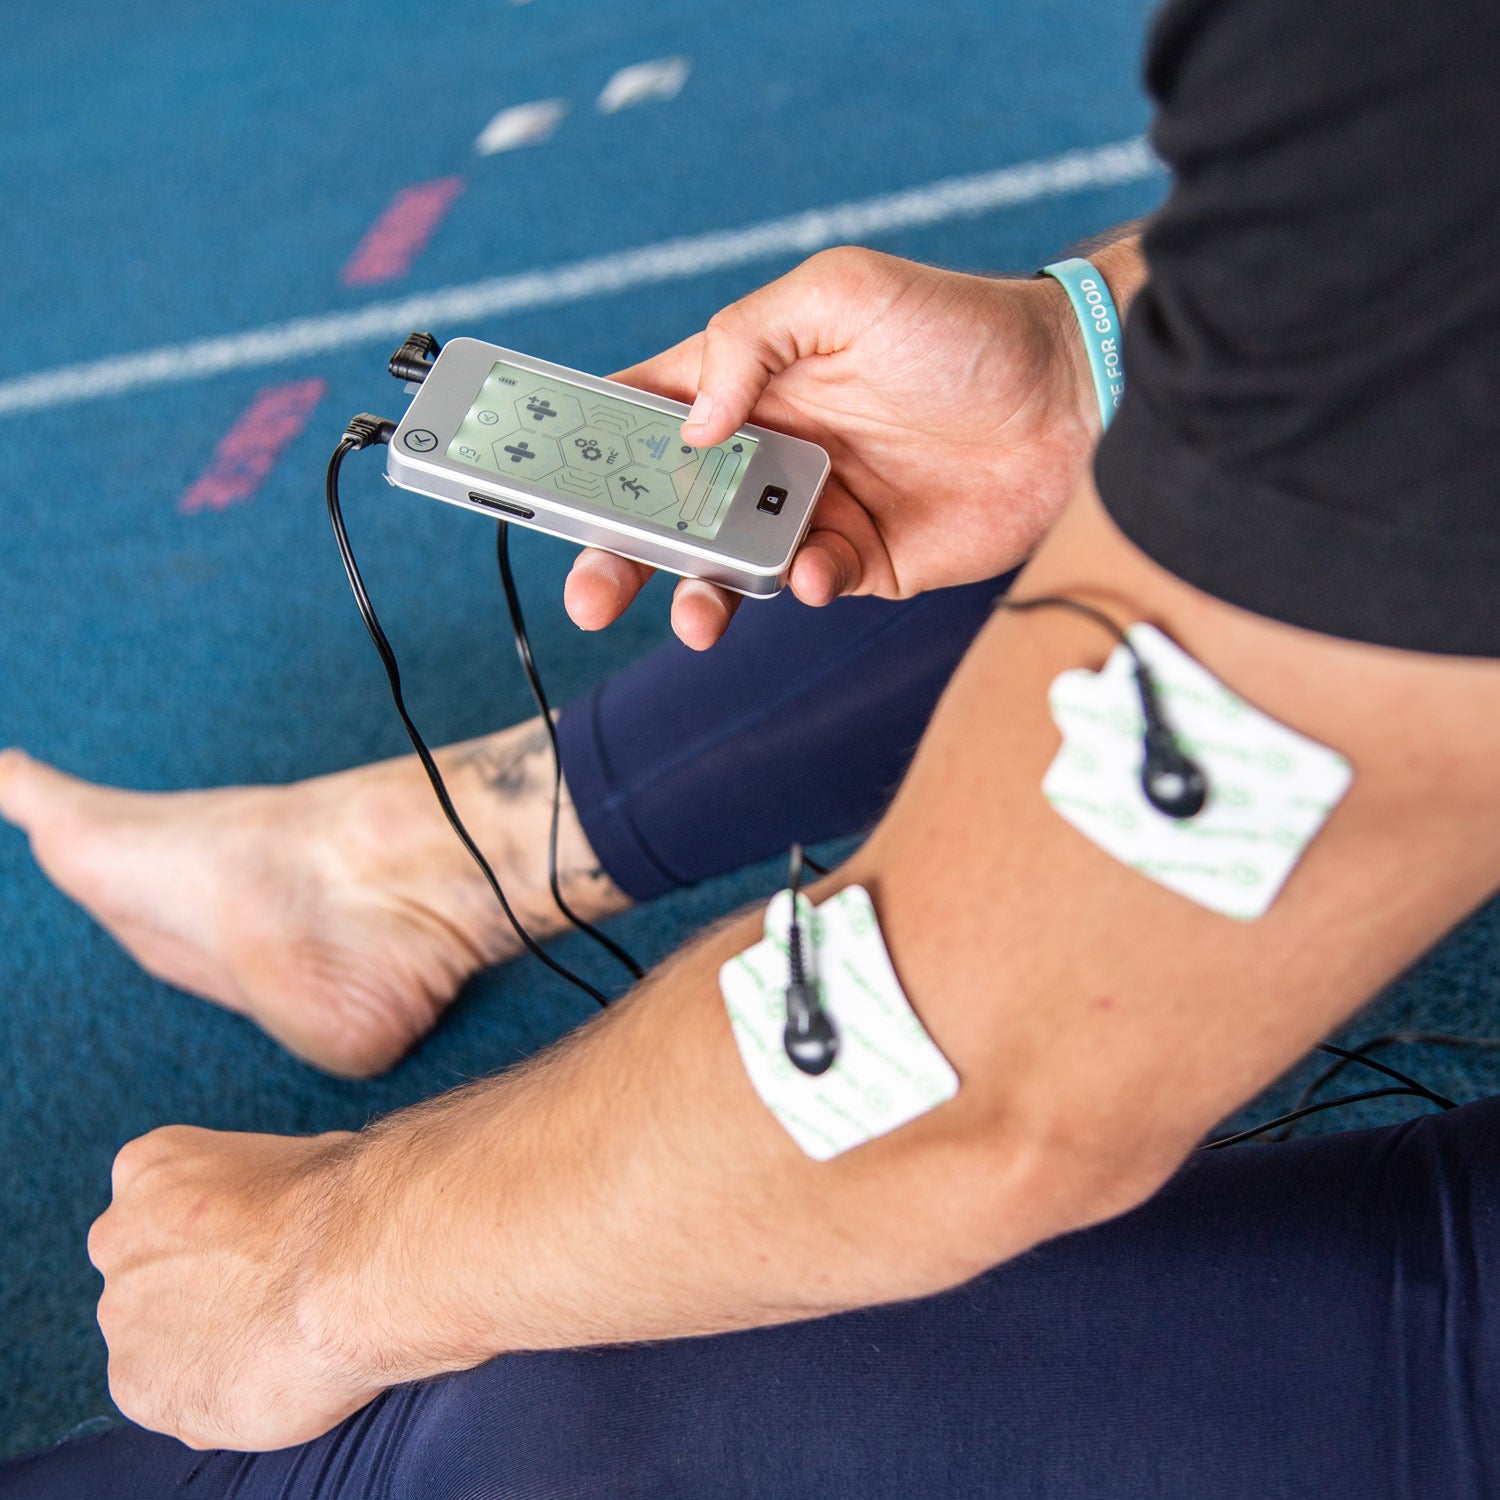 nurokor physical therapy - using nurokor mibody device for recovery on arm muscles